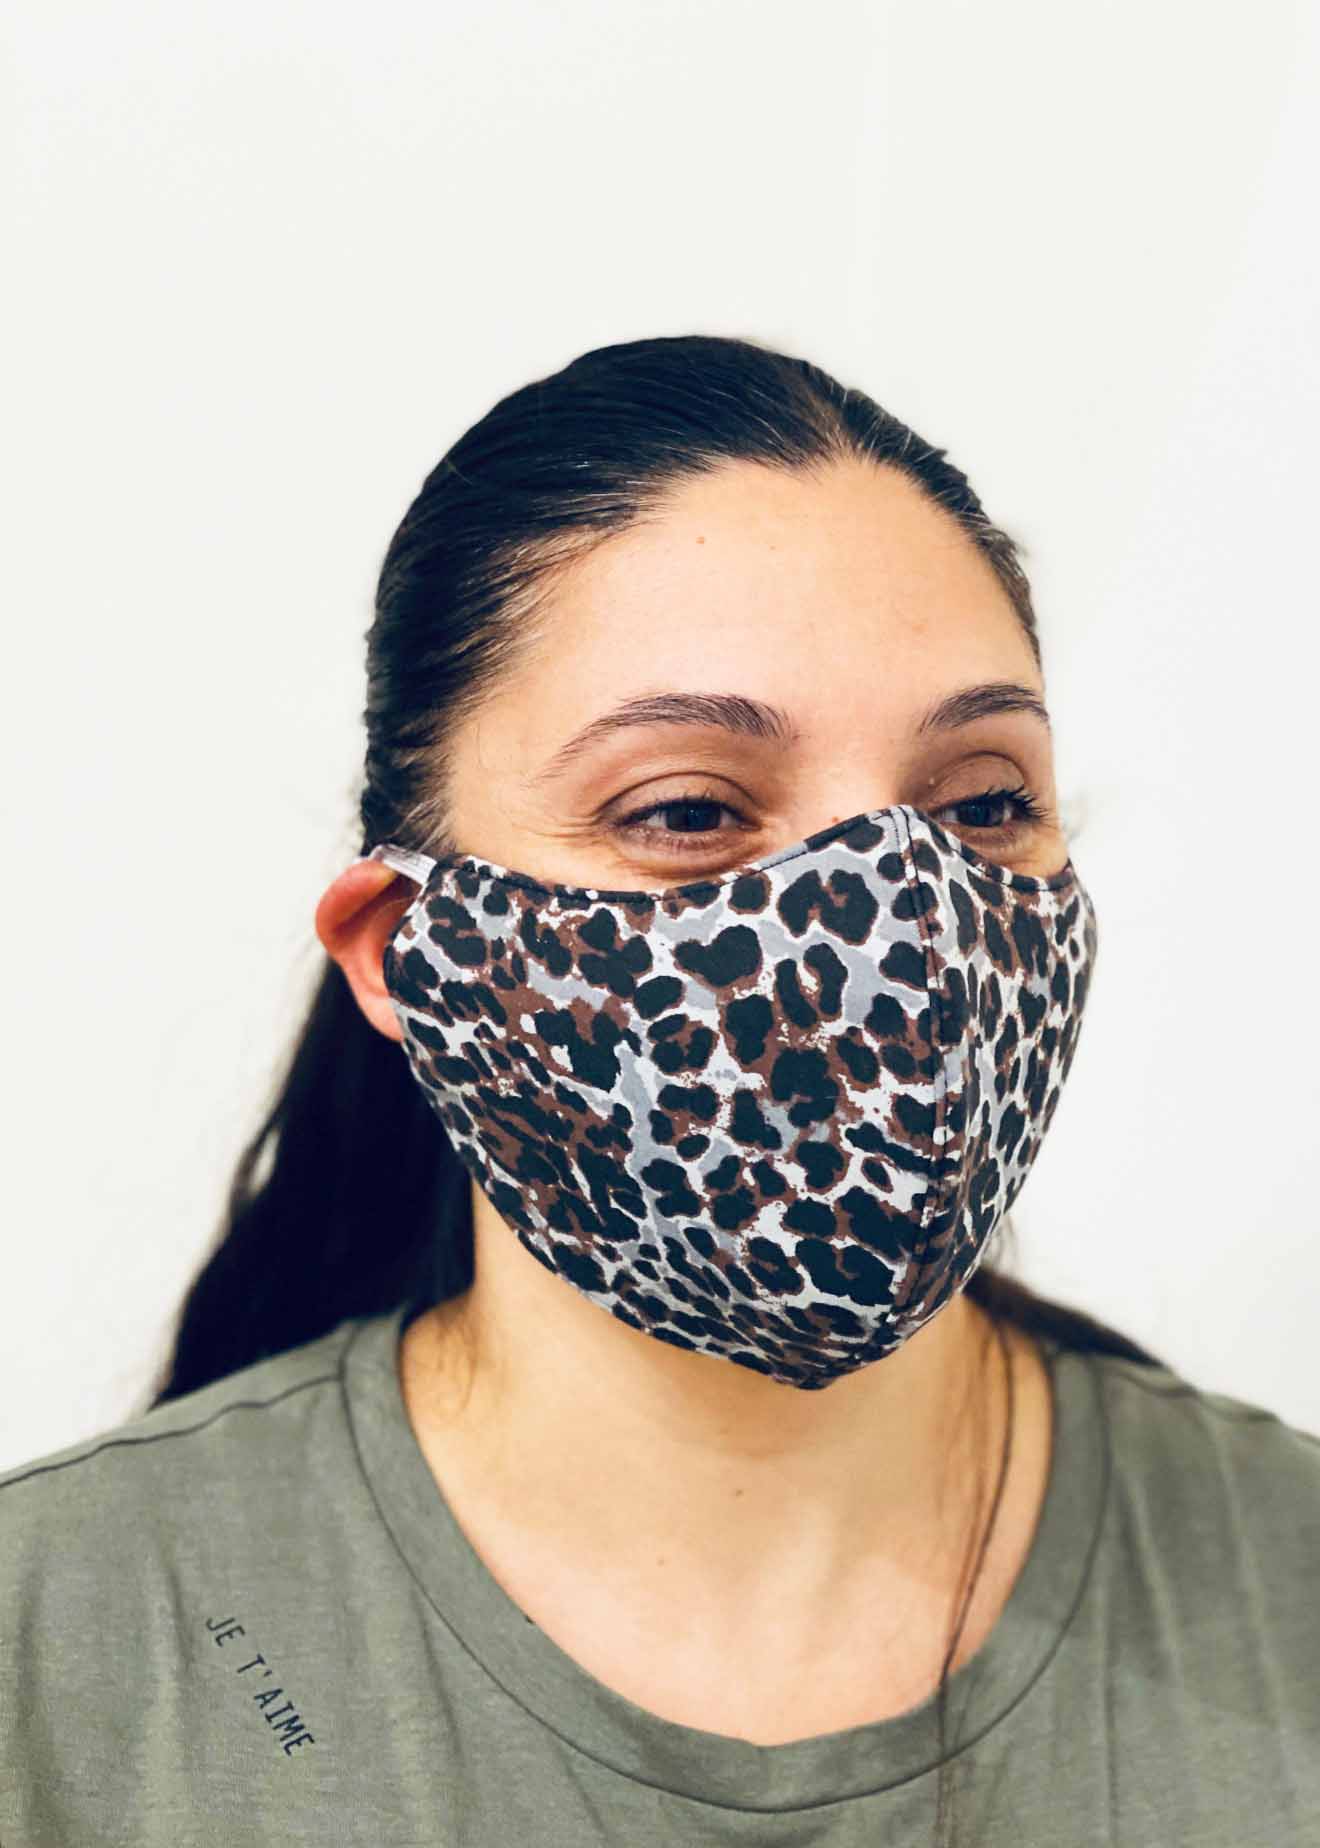 Ladies DHHS Leopard (Grey/Brown) Face Mask by Laundry Box Melbourne